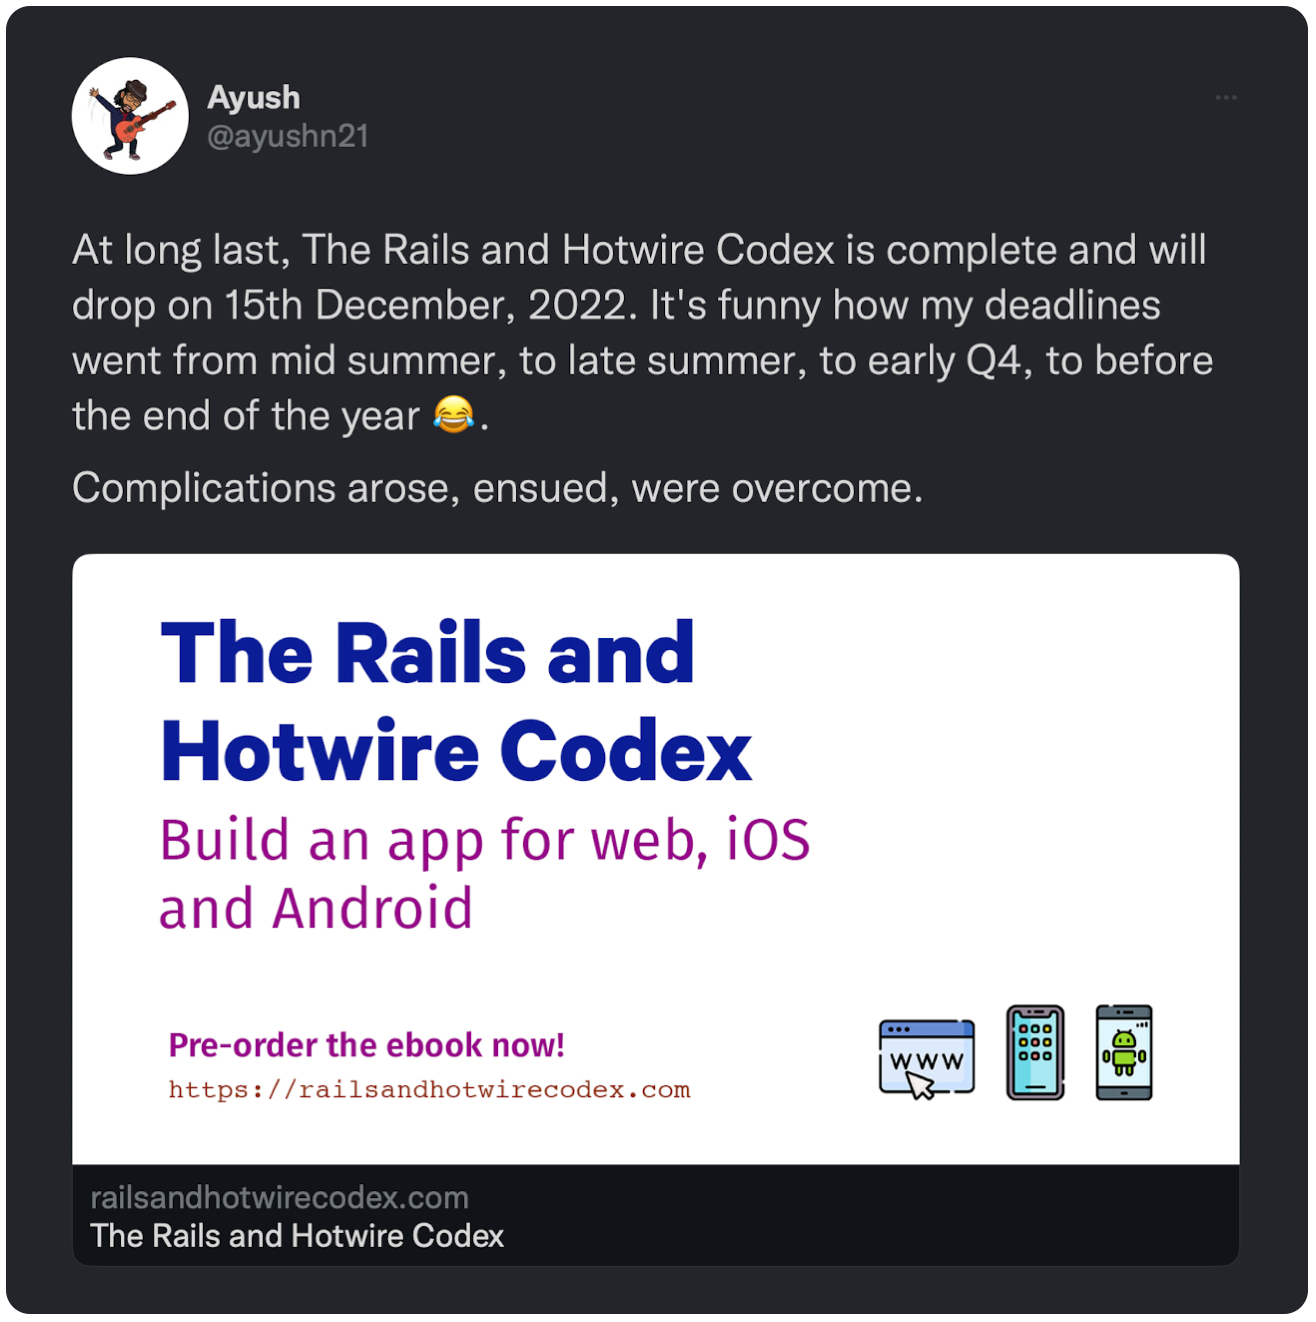 At long last, The Rails and Hotwire Codex is complete and will drop on 15th December, 2022. It's funny how my deadlines went from mid summer, to late summer, to early Q4, to before the end of the year 😂. Complications arose, ensued, were overcome.